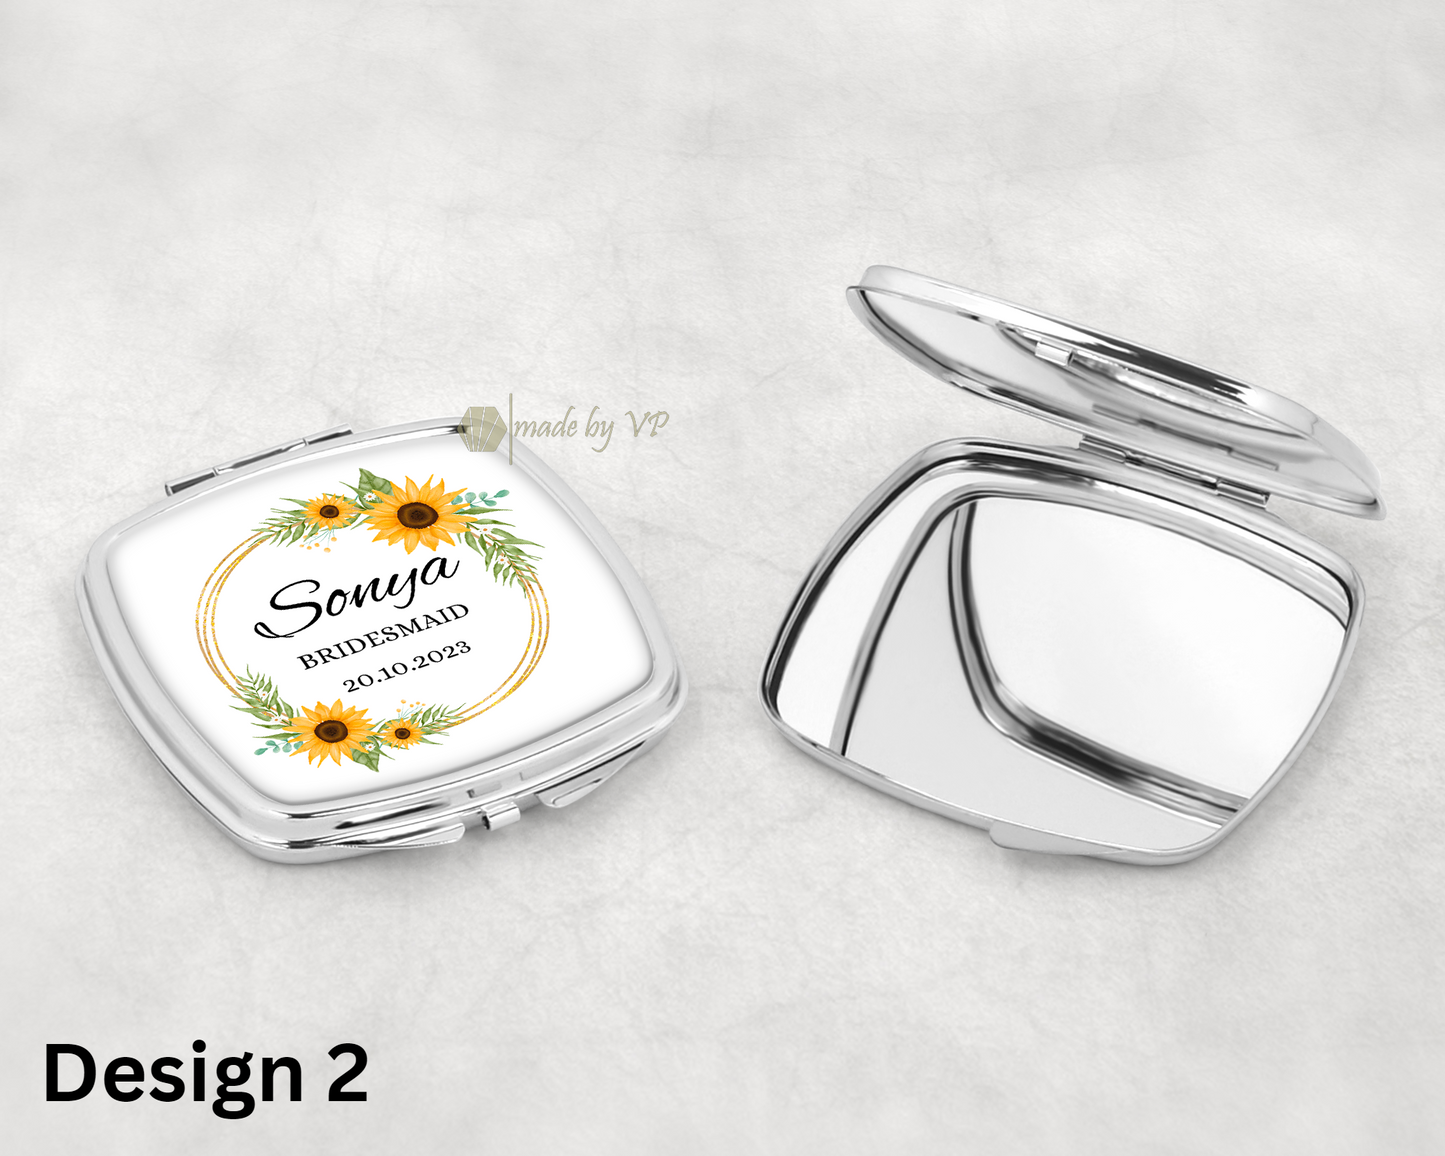 Compact Mirror With a Box